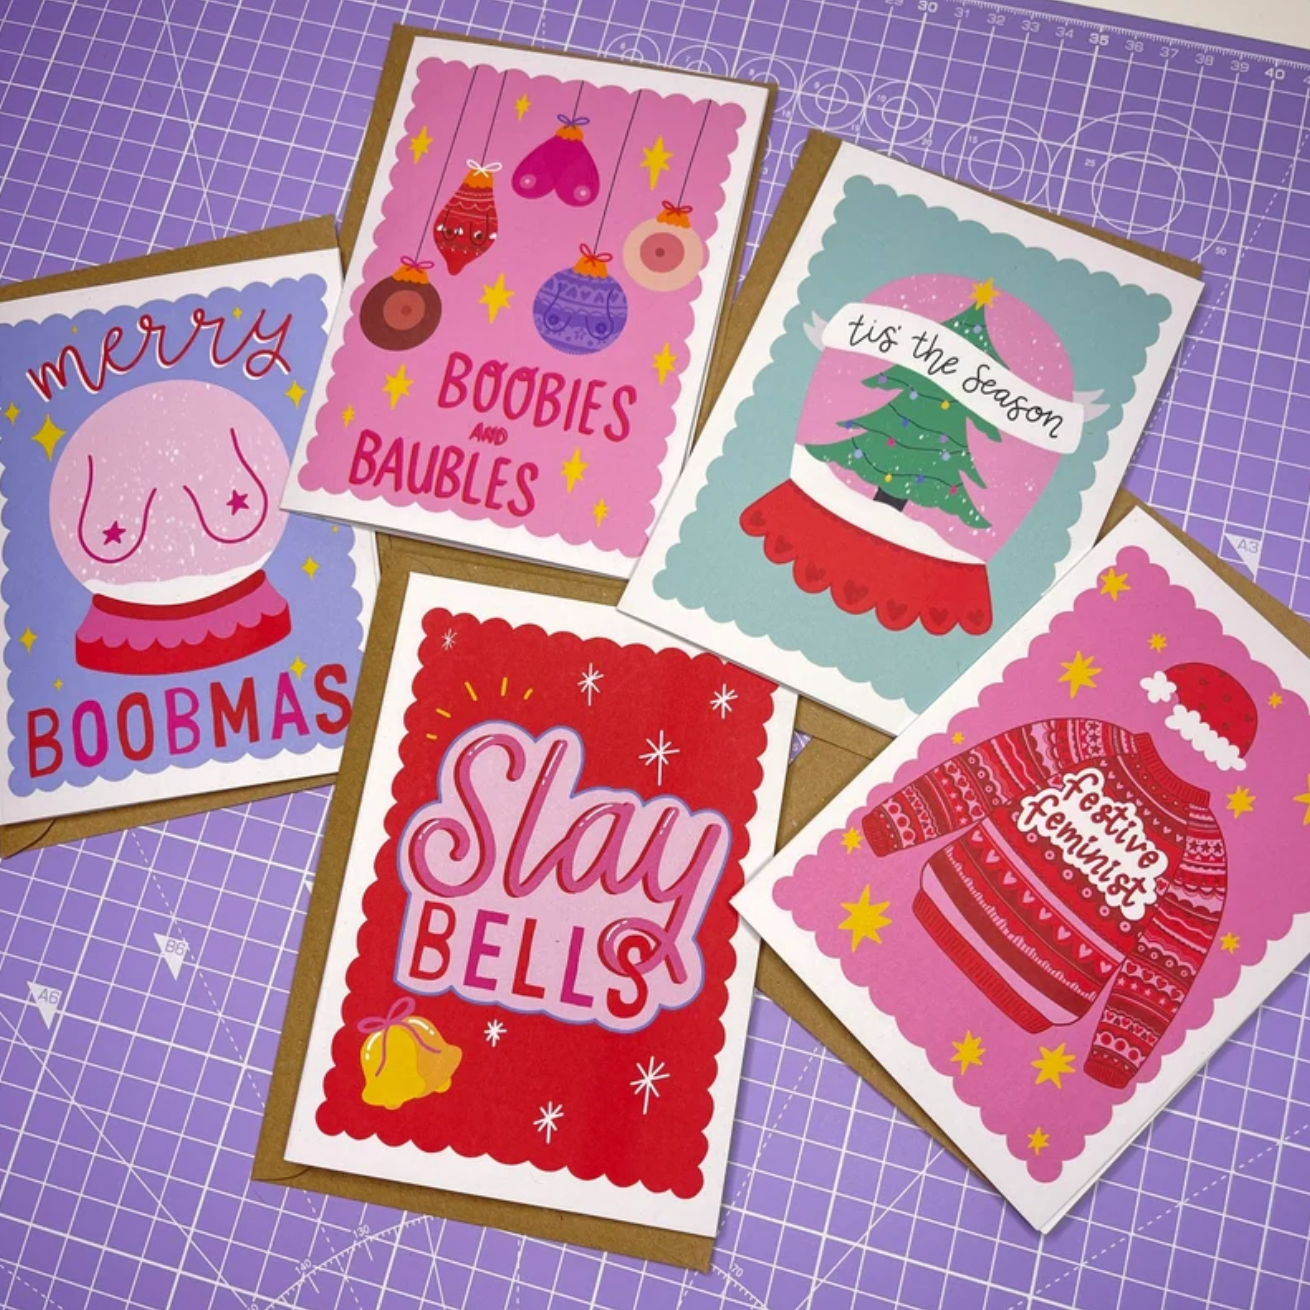 Christmas Cards - Self Love and Feminist Themed